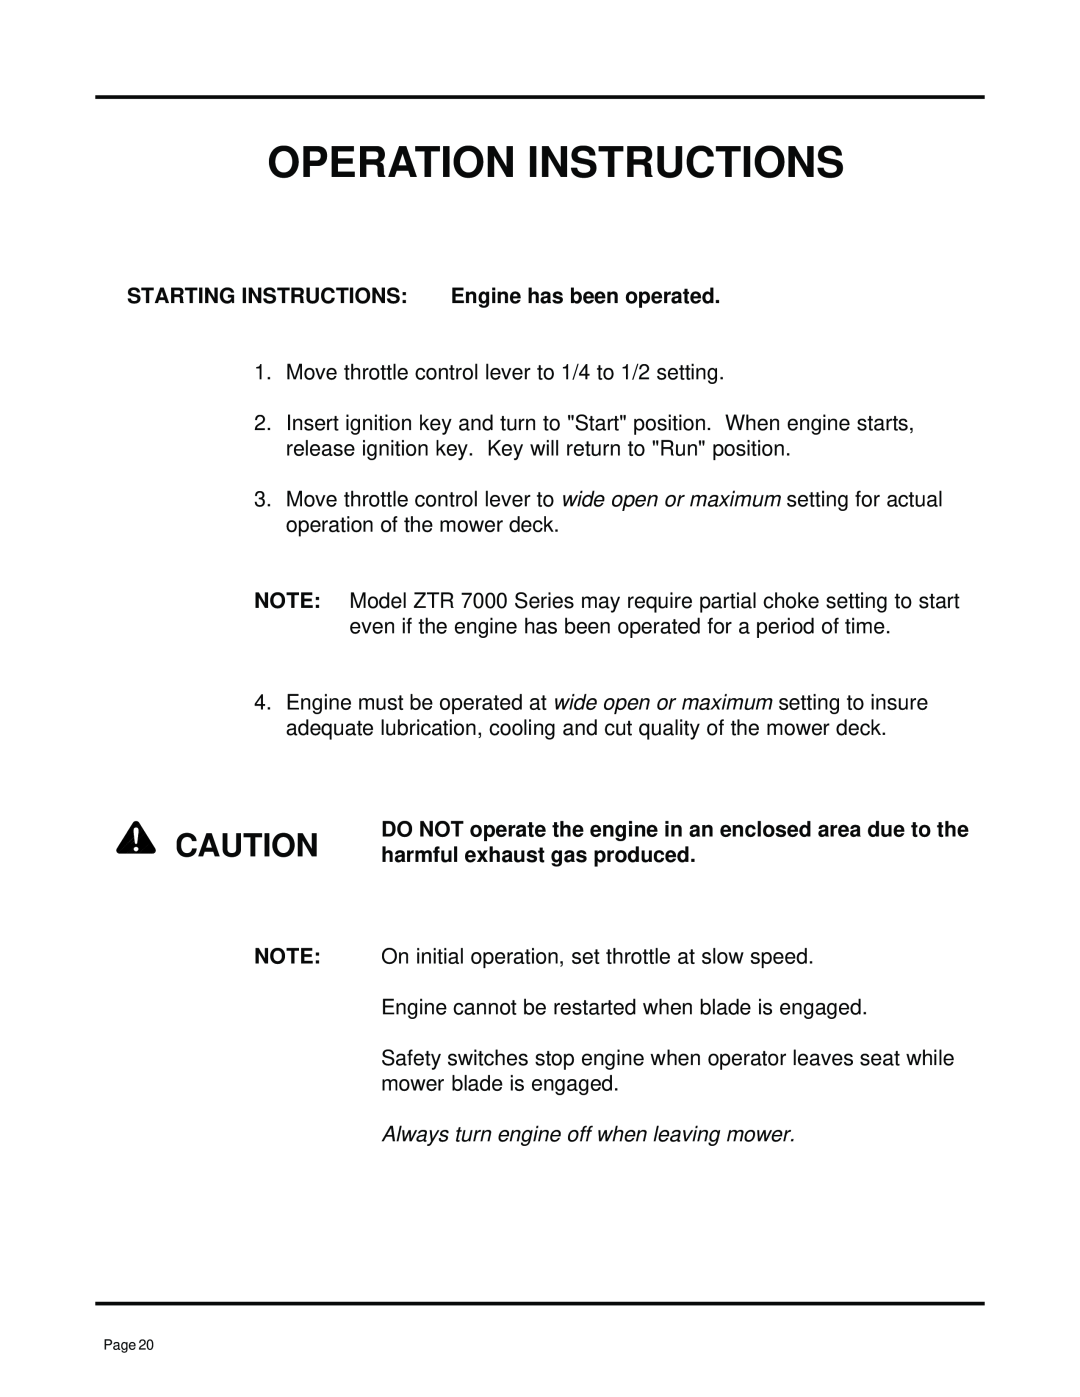 Dixon ZTR 7025, 13091-0500 manual Operation Instructions, Starting Instructions, Always turn engine off when leaving mower 